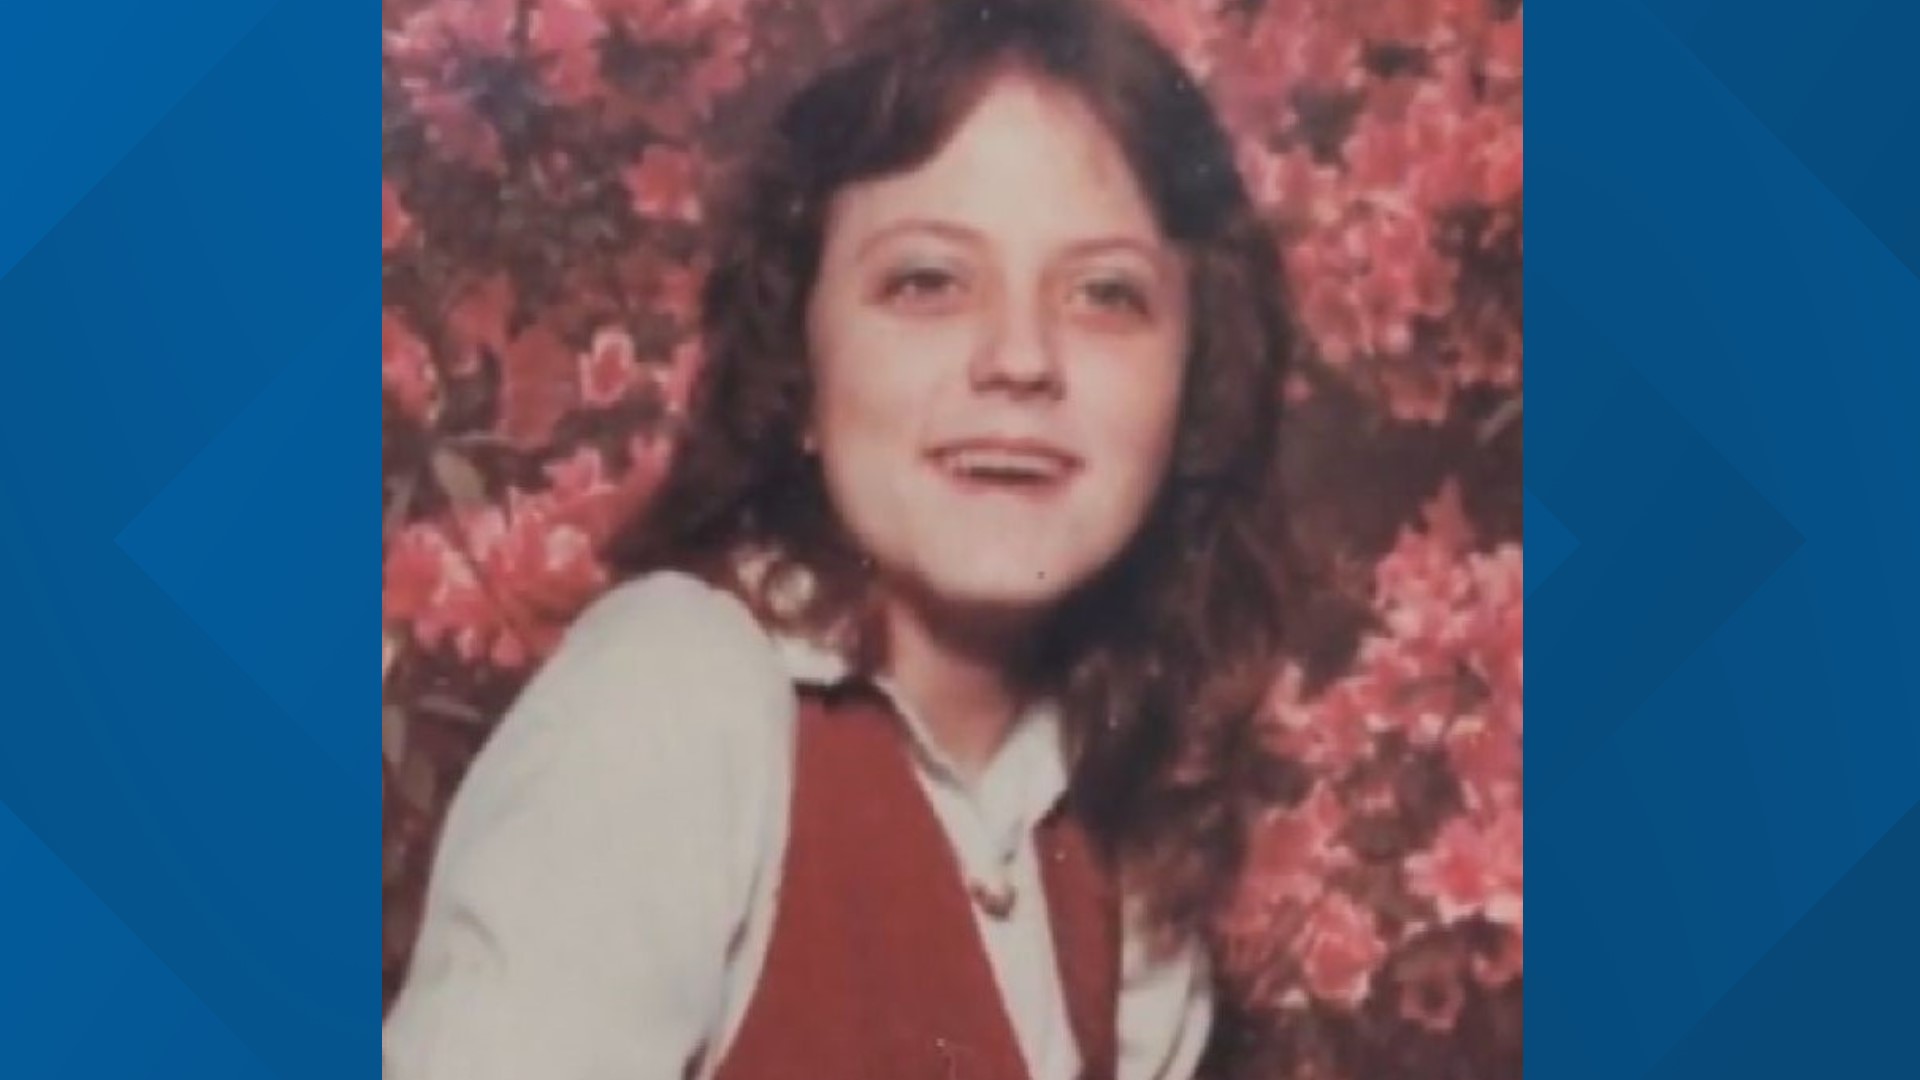 Shirlene Hammack went missing in the fall of 1981 after the she left home to join a touring fair.